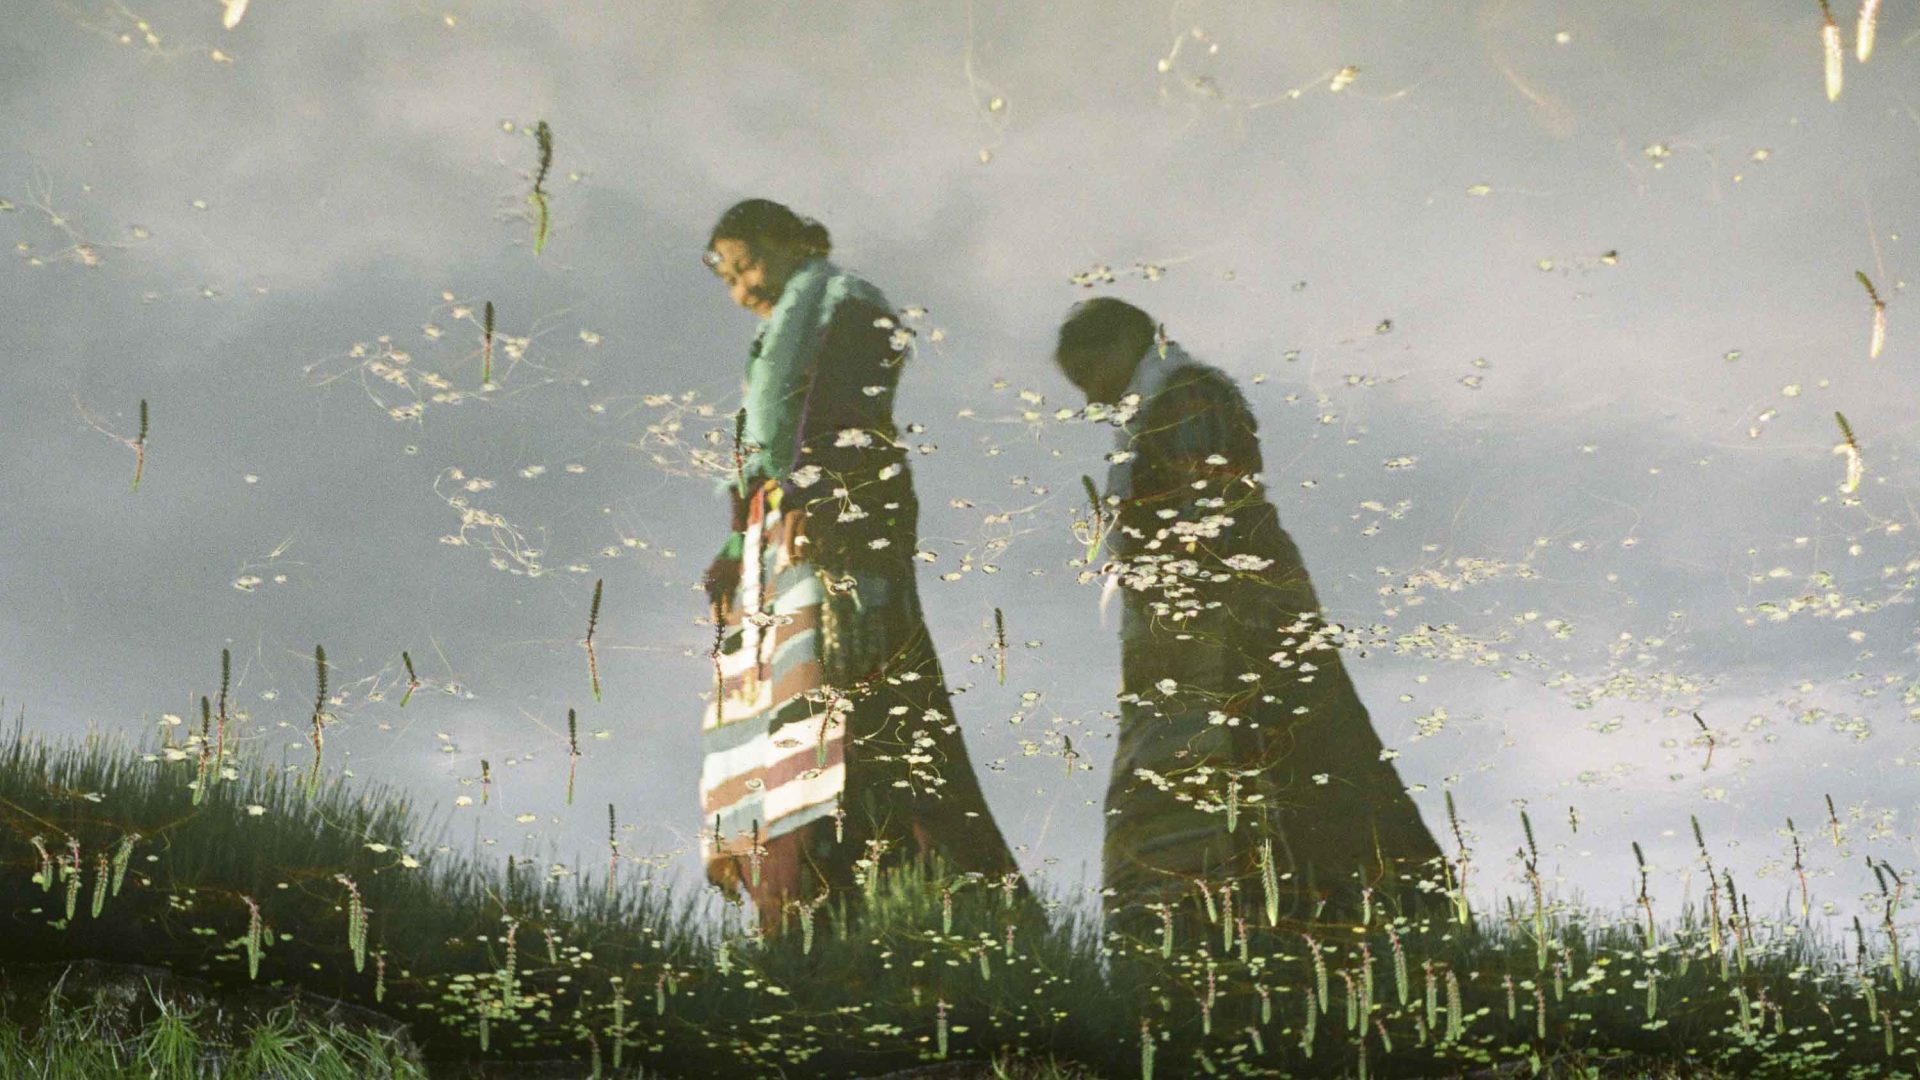 Two women in traditional textiles walk smiling through the grass.